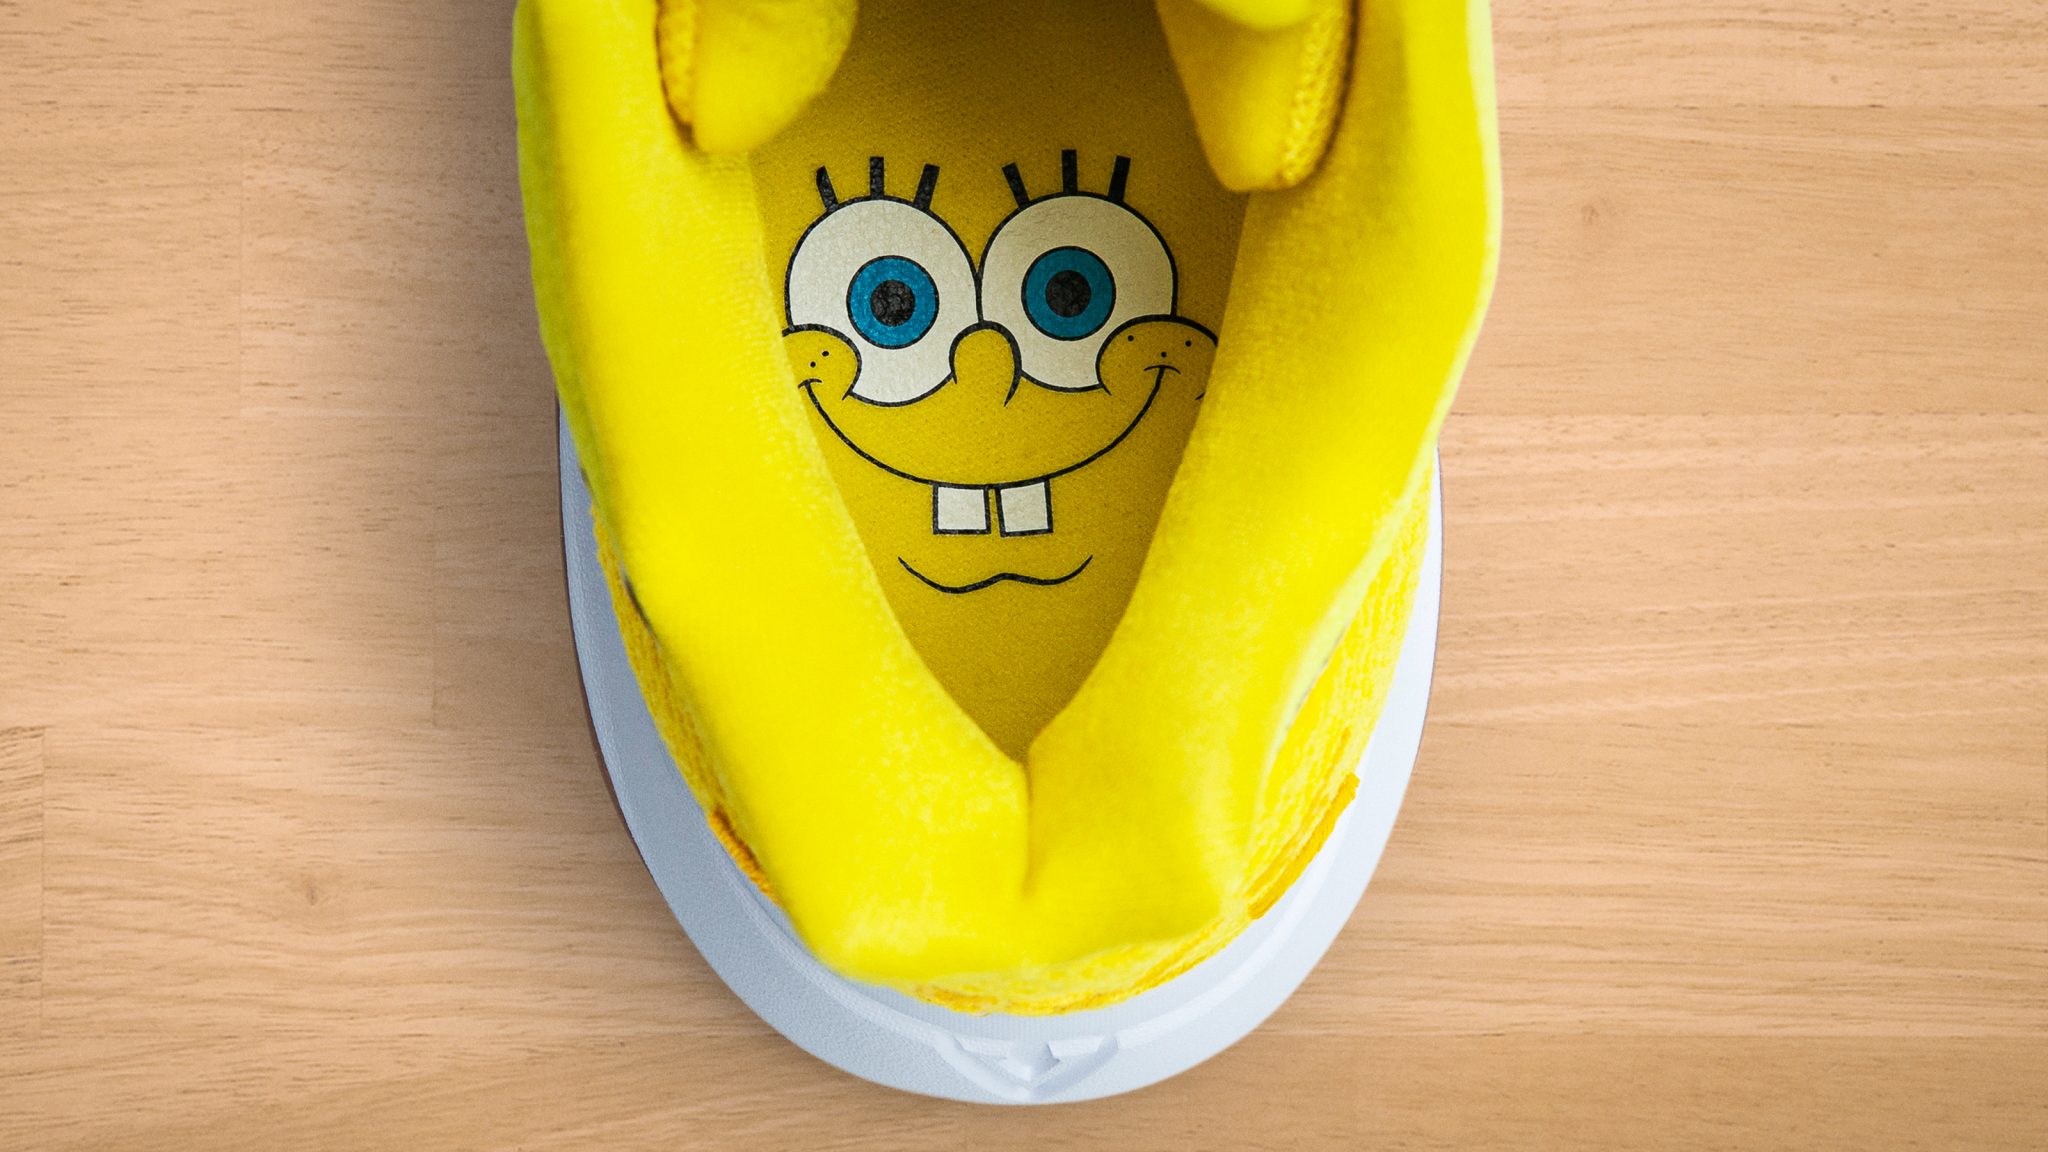 Evento Extracto Concentración Nike and Viacom Nickelodeon Consumer Products Launch the Kyrie X Spongebob  Squarepants Collection - Licensing International